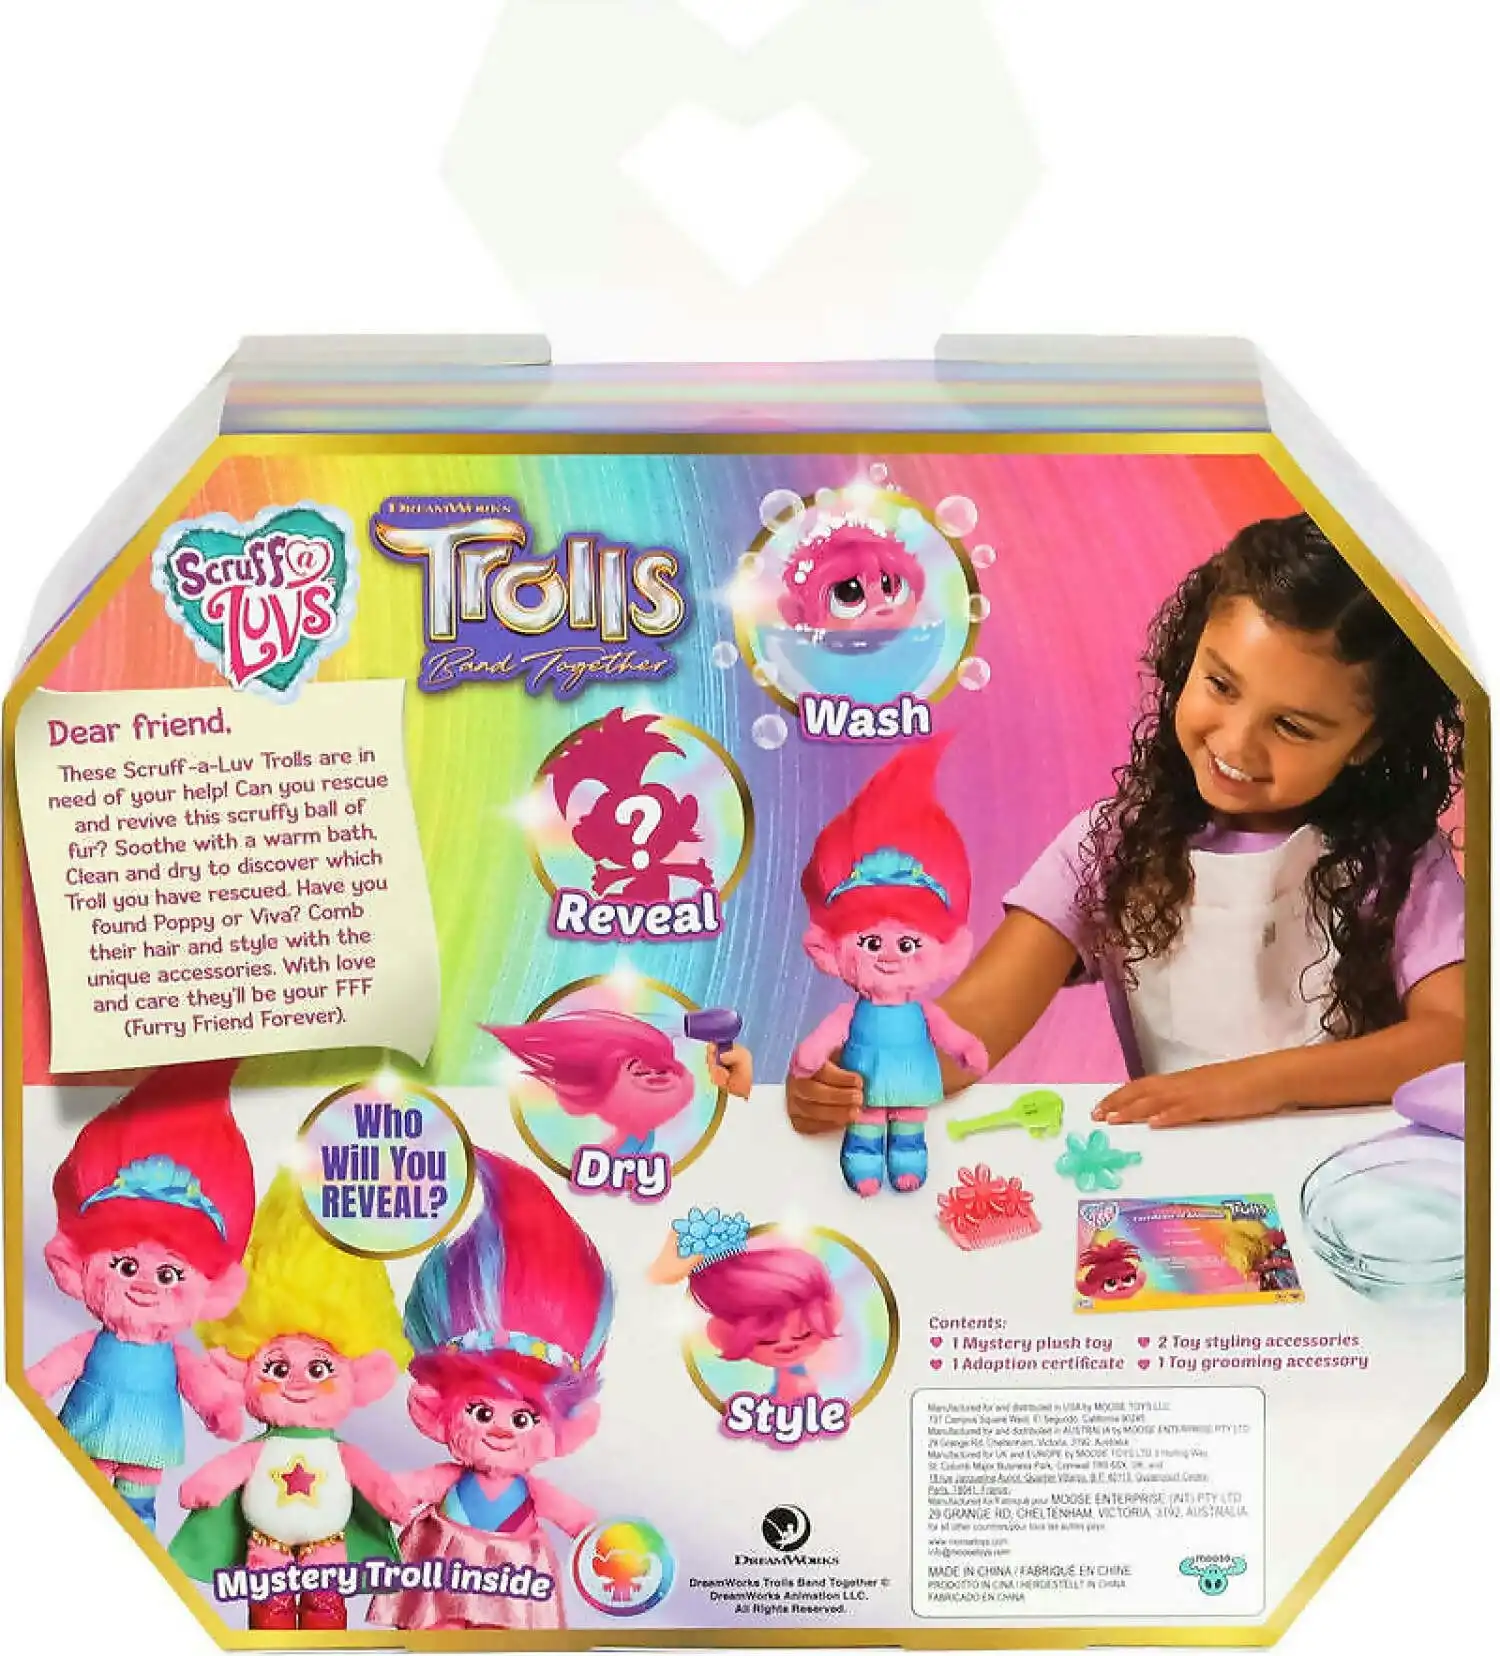 Little Live Pets - Scruff-a-luvs Trolls Band Together Reveal. Wash Reveal And Style A Cute Plush Trolls Doll